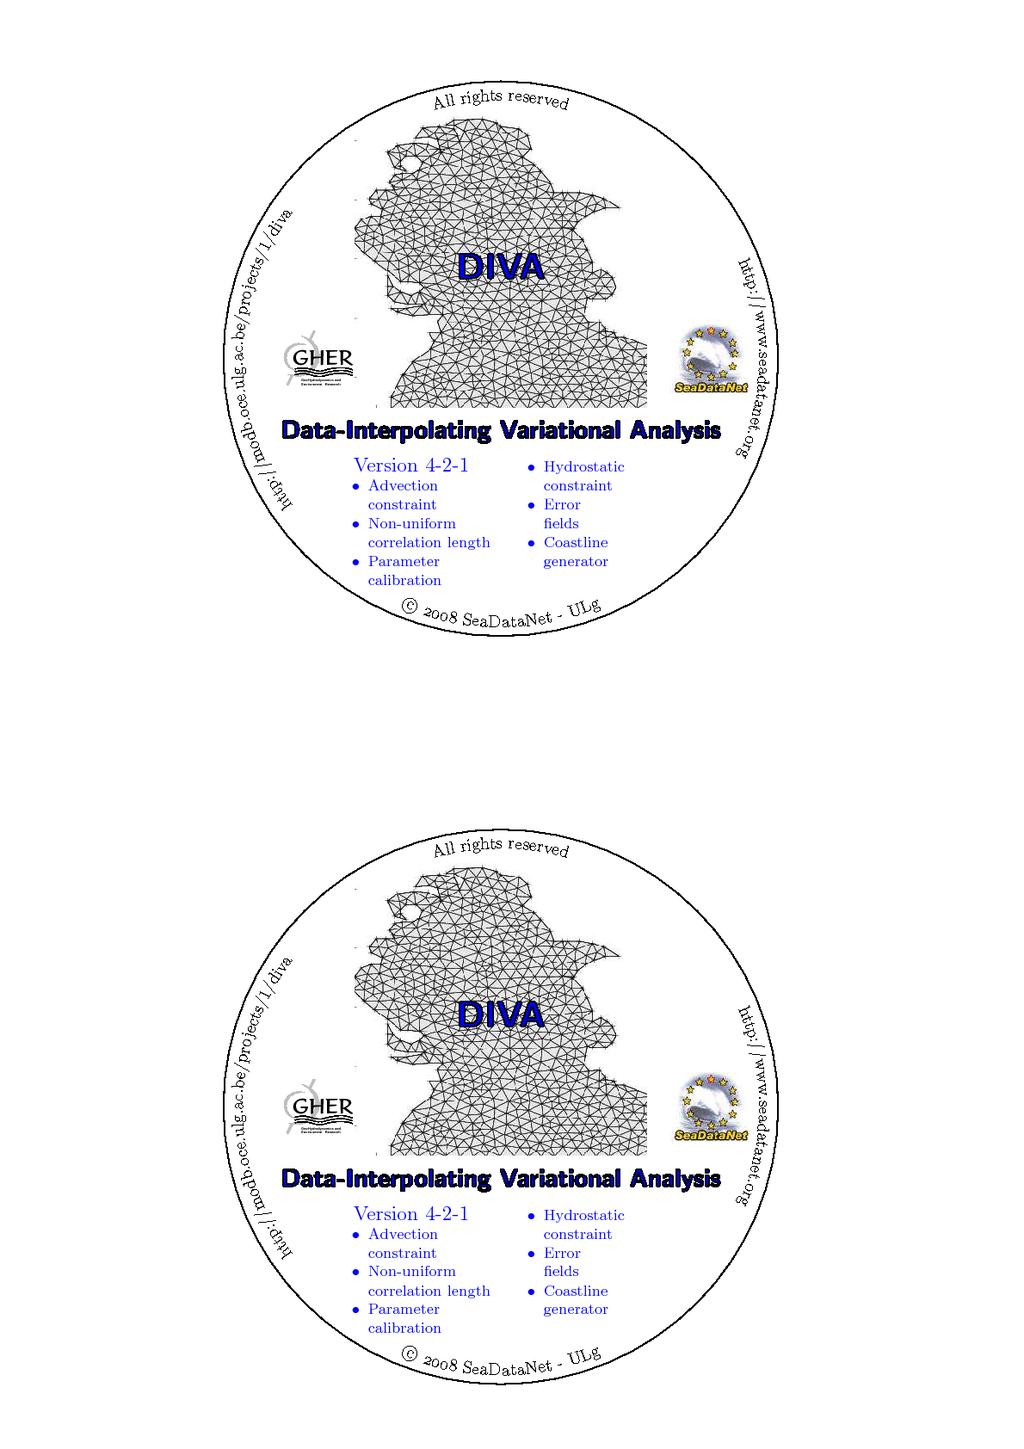 1.9.3. Diva Diva is a program written in Fortran and Shell scripts performing a variational analysis. This program is available at http://modb.oce.ulg.ac.be/modb/diva.html.